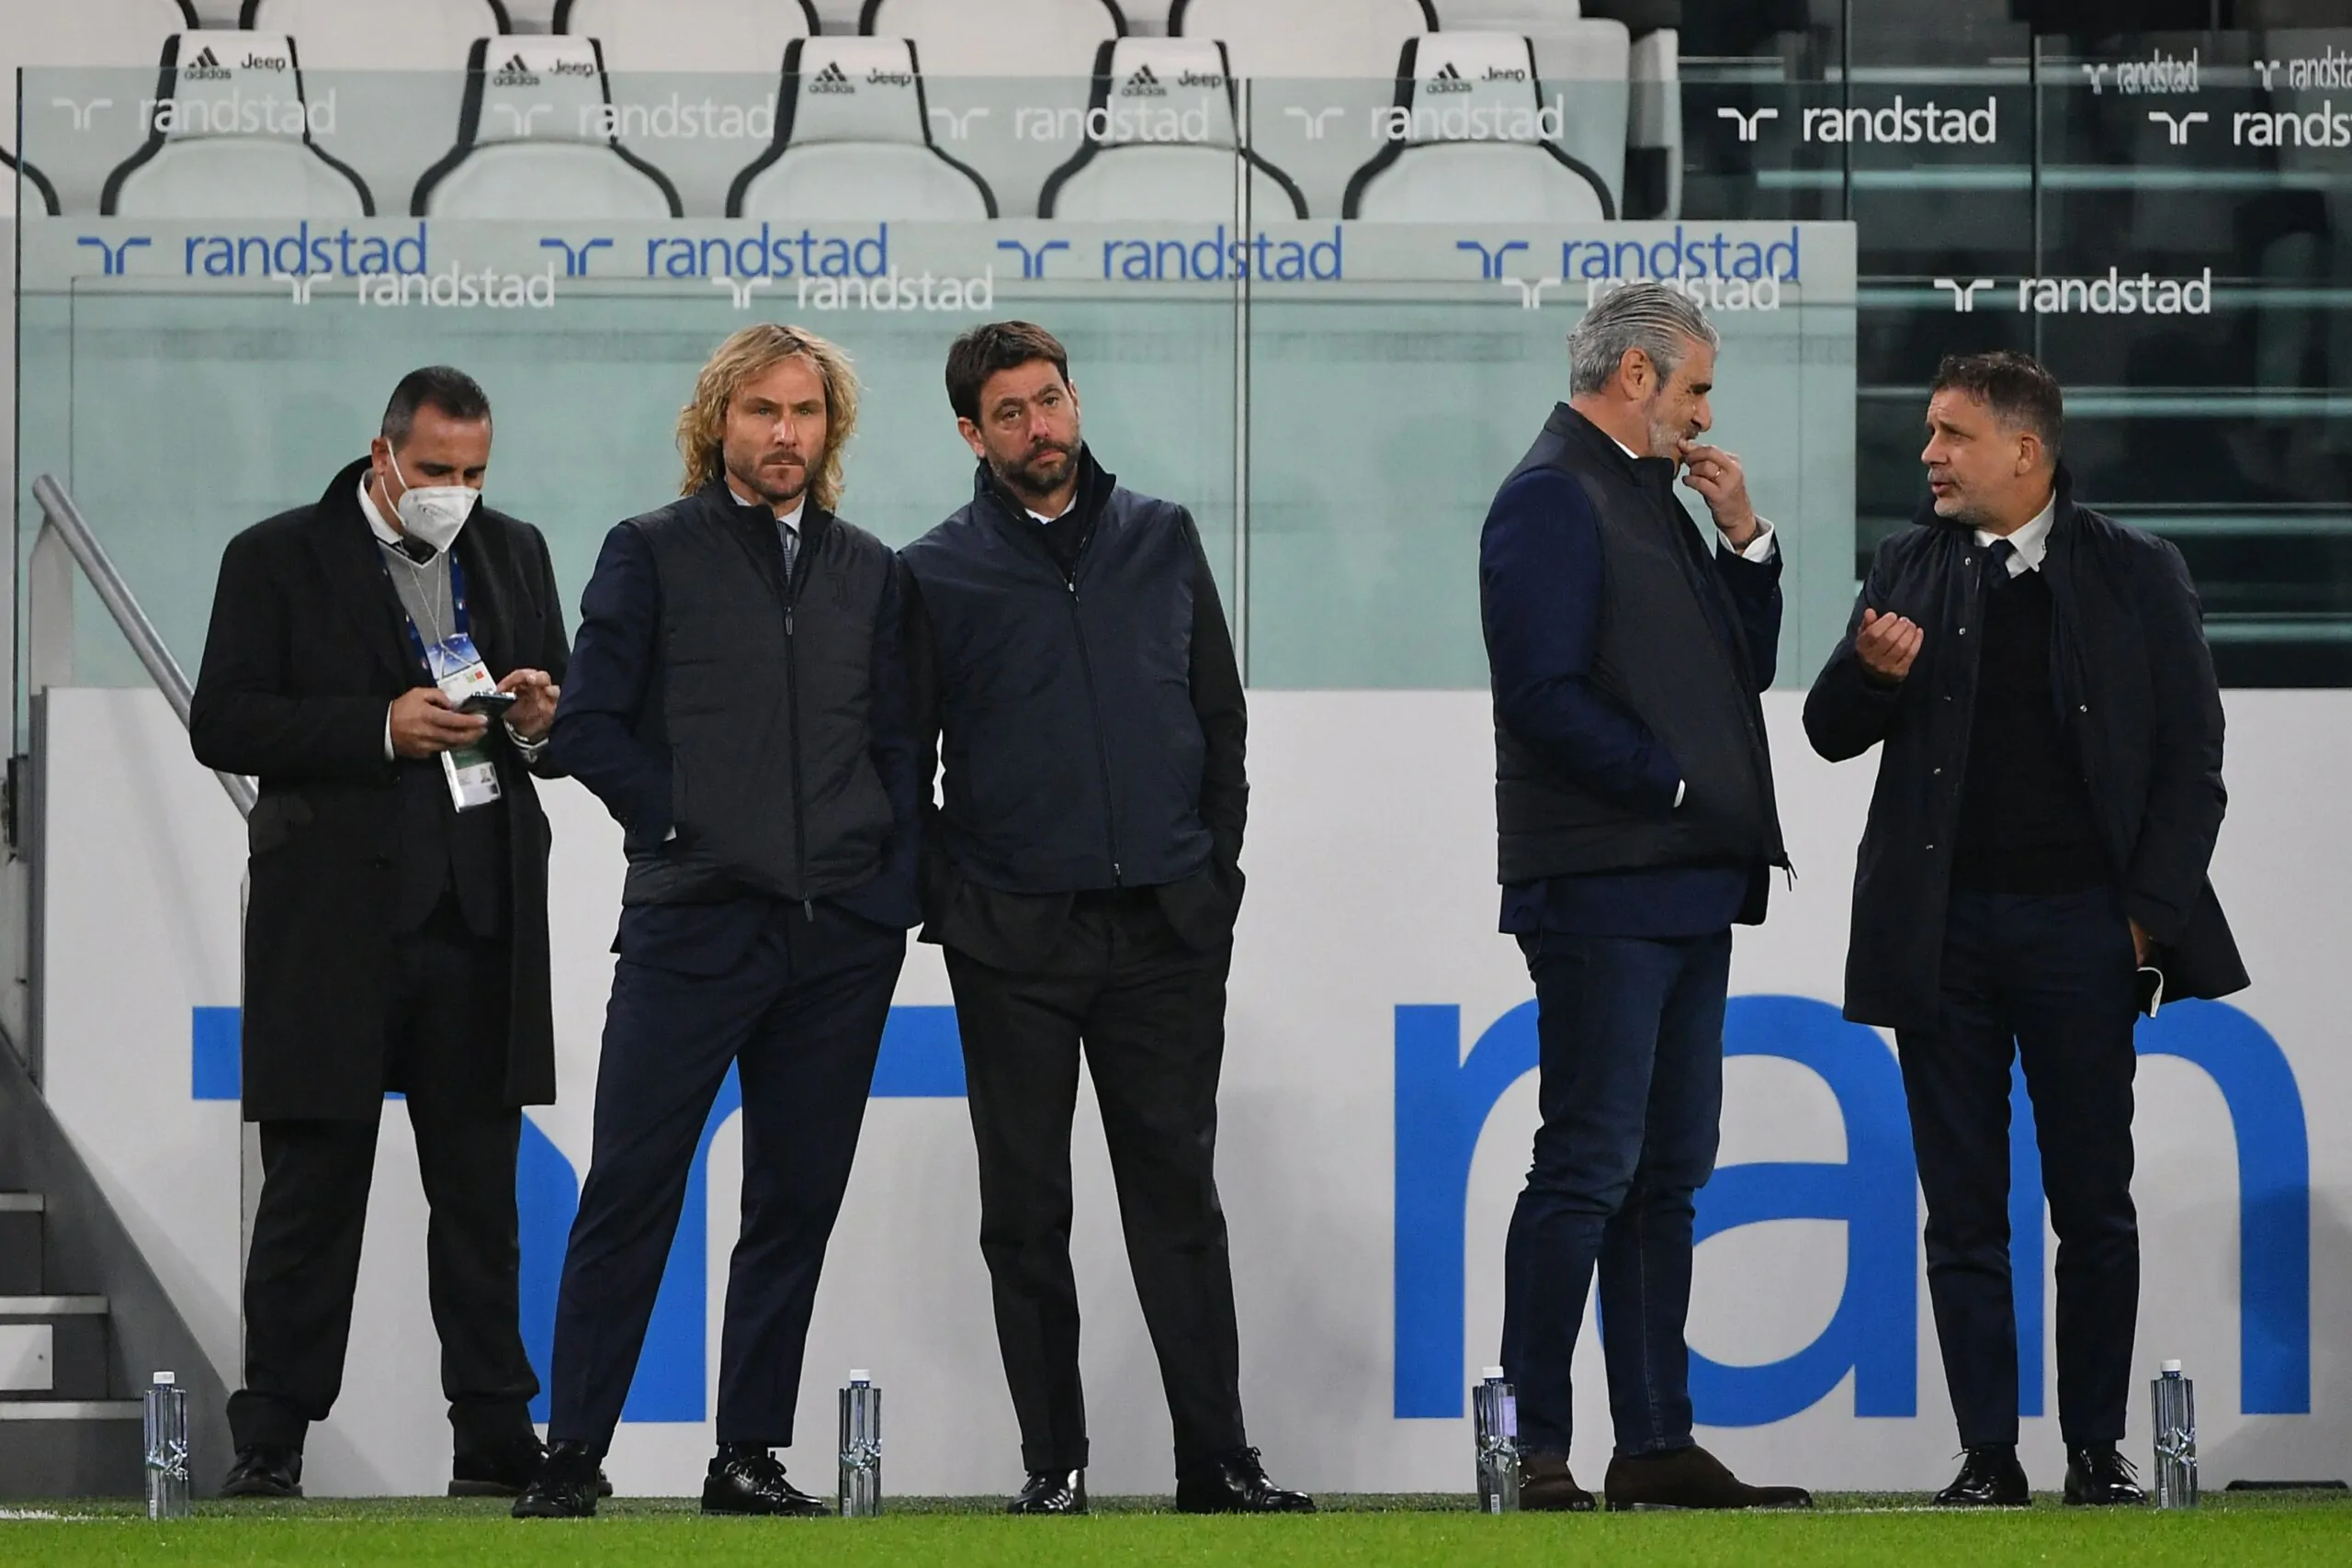 Juventus and Massimiliano Allegri had their first meeting earlier this week to discuss their transfer market strategies for the summer.